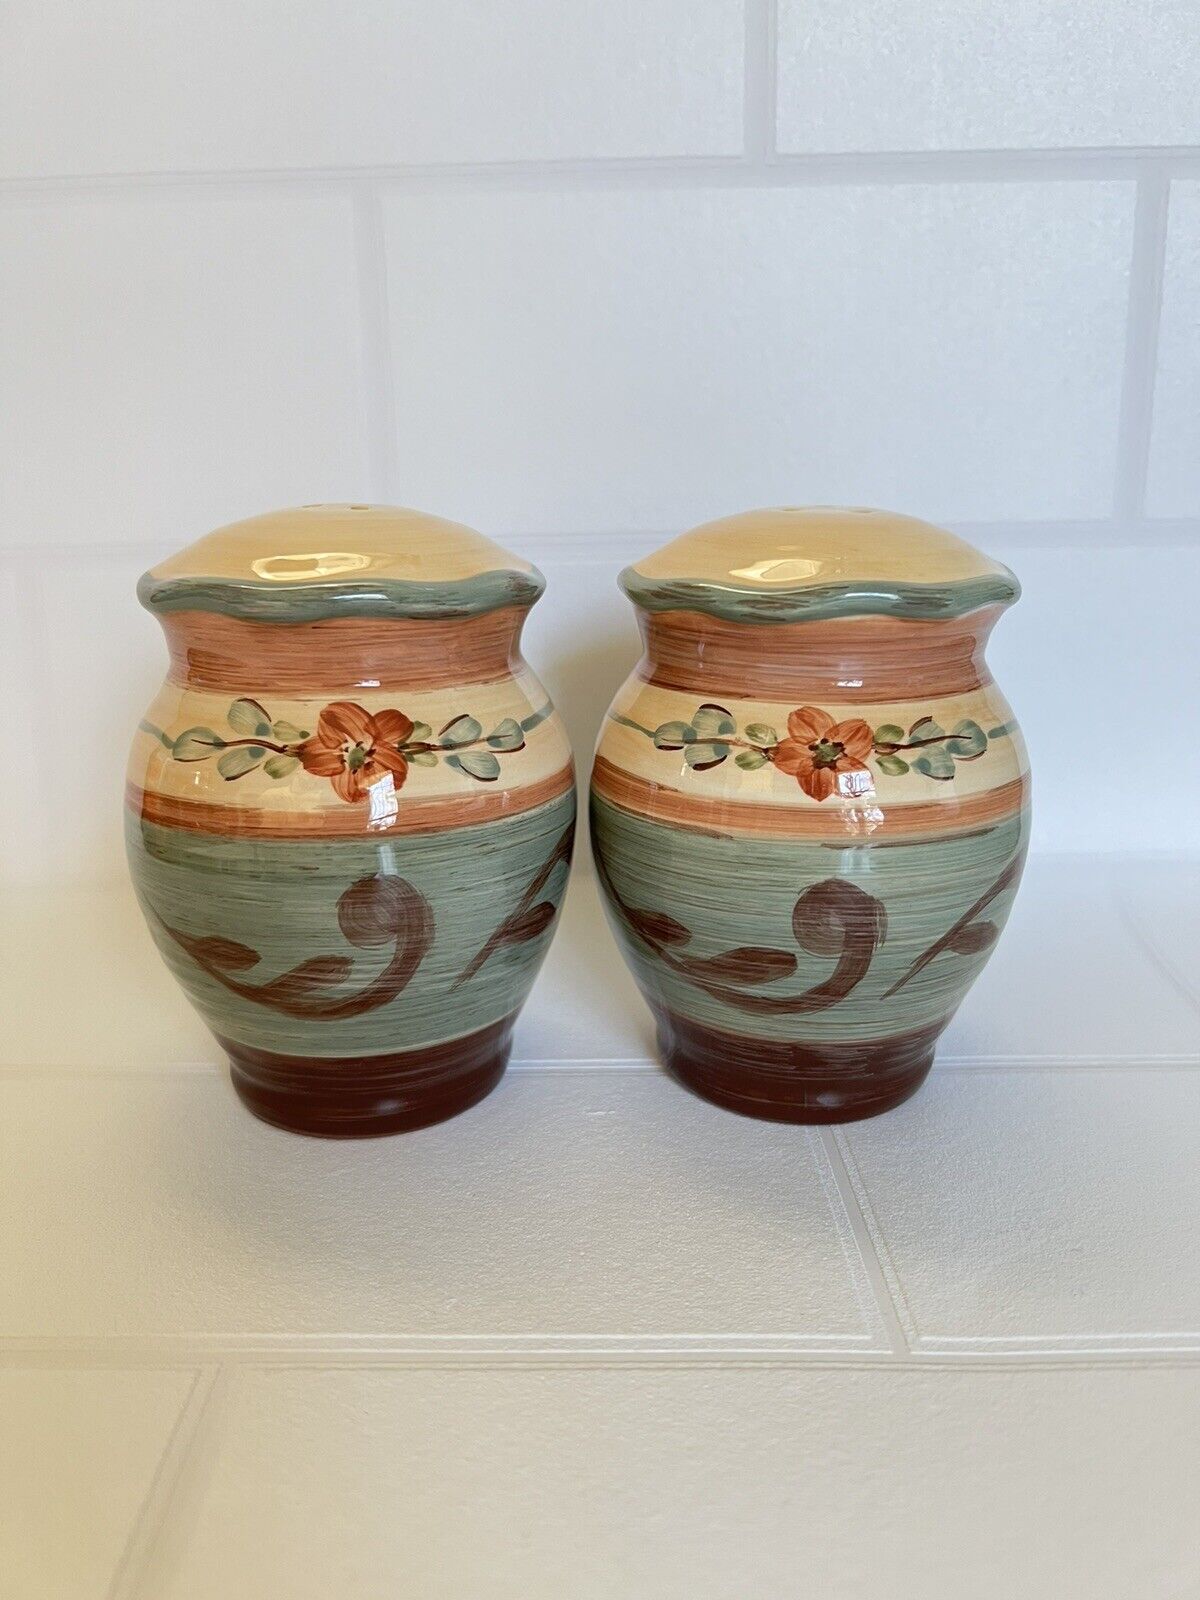 Discontinued Certified International Tuscan Landscape Cheese/S&P Shakers Set